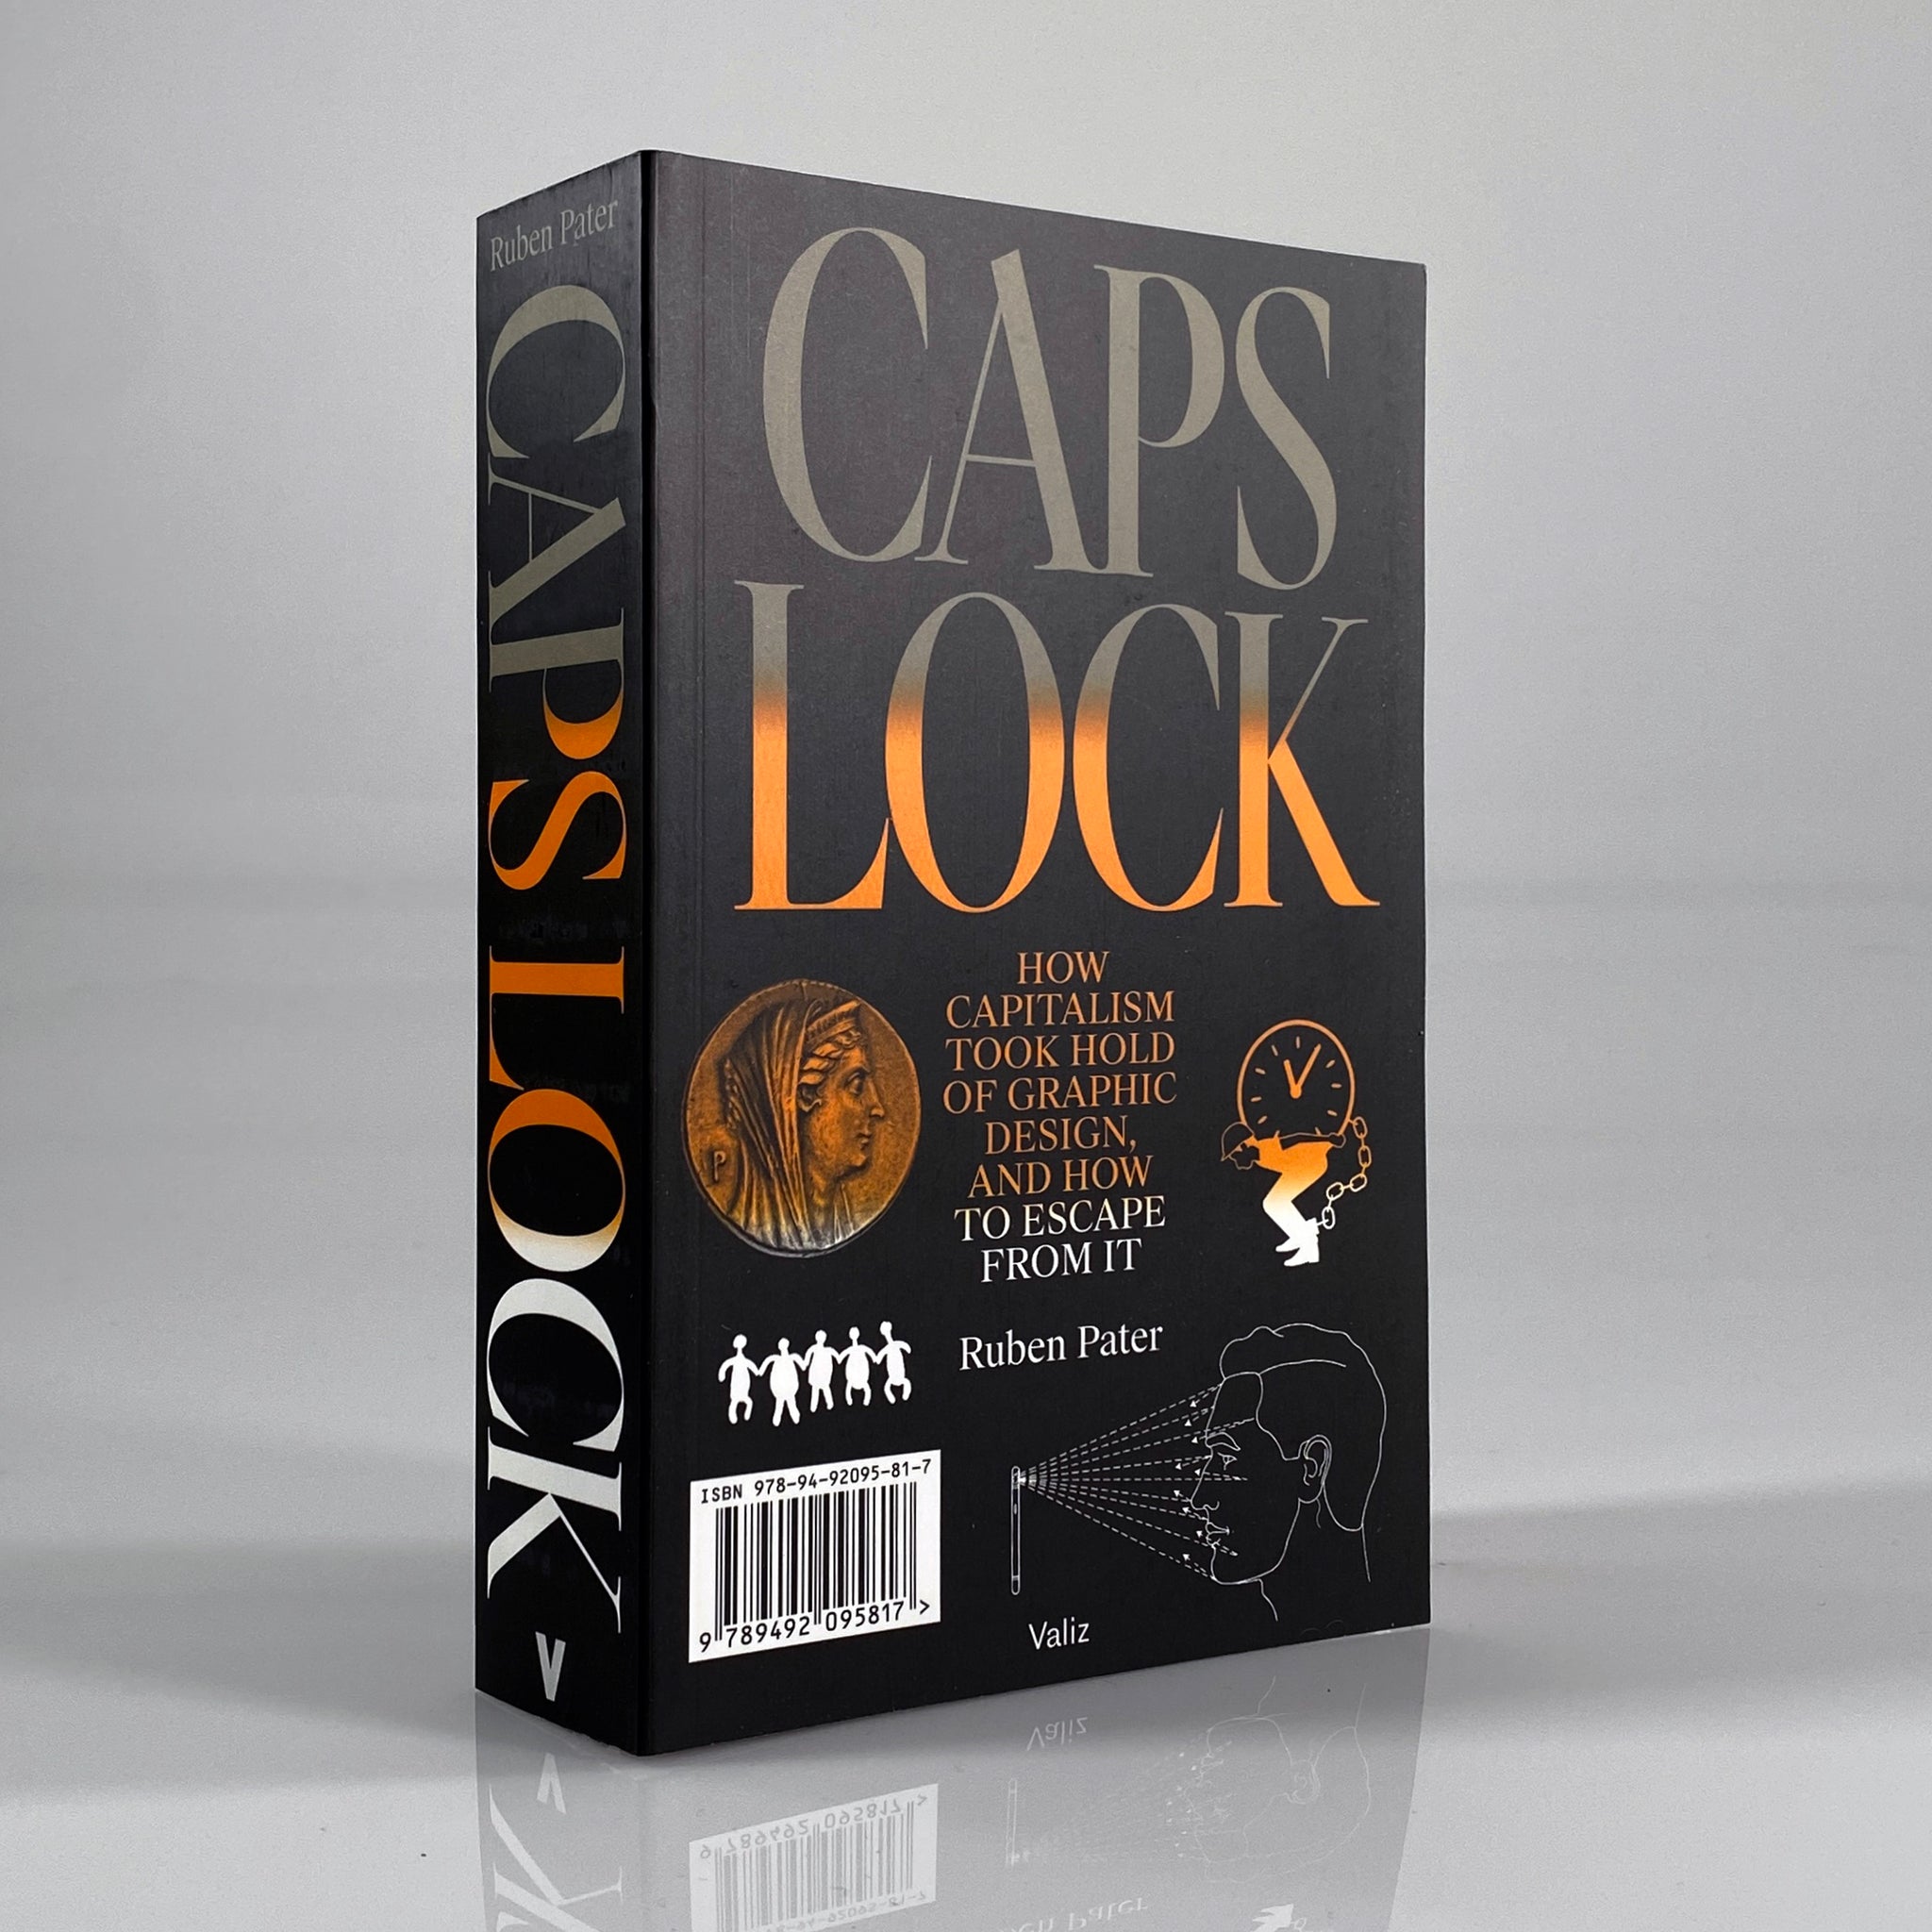 CAPS LOCK: How Capitalism Took Hold of Graphic Design, and How to Escape from It